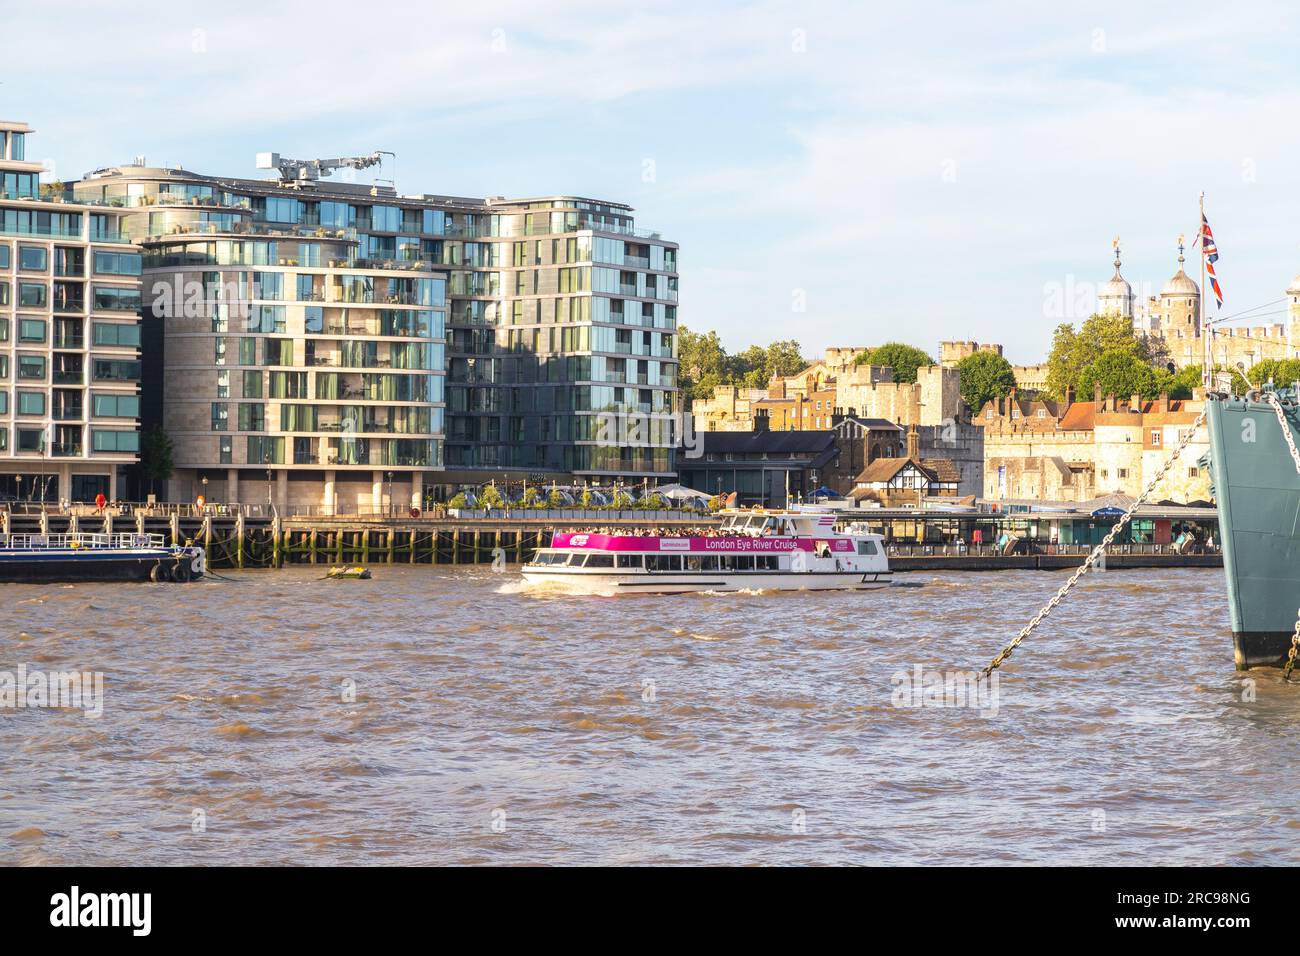 LONDON, UK - 6TH JULY 2023: A London Eye River Cruise boat along the River Thames in central London during the day. People can be seen on the boat and Stock Photo